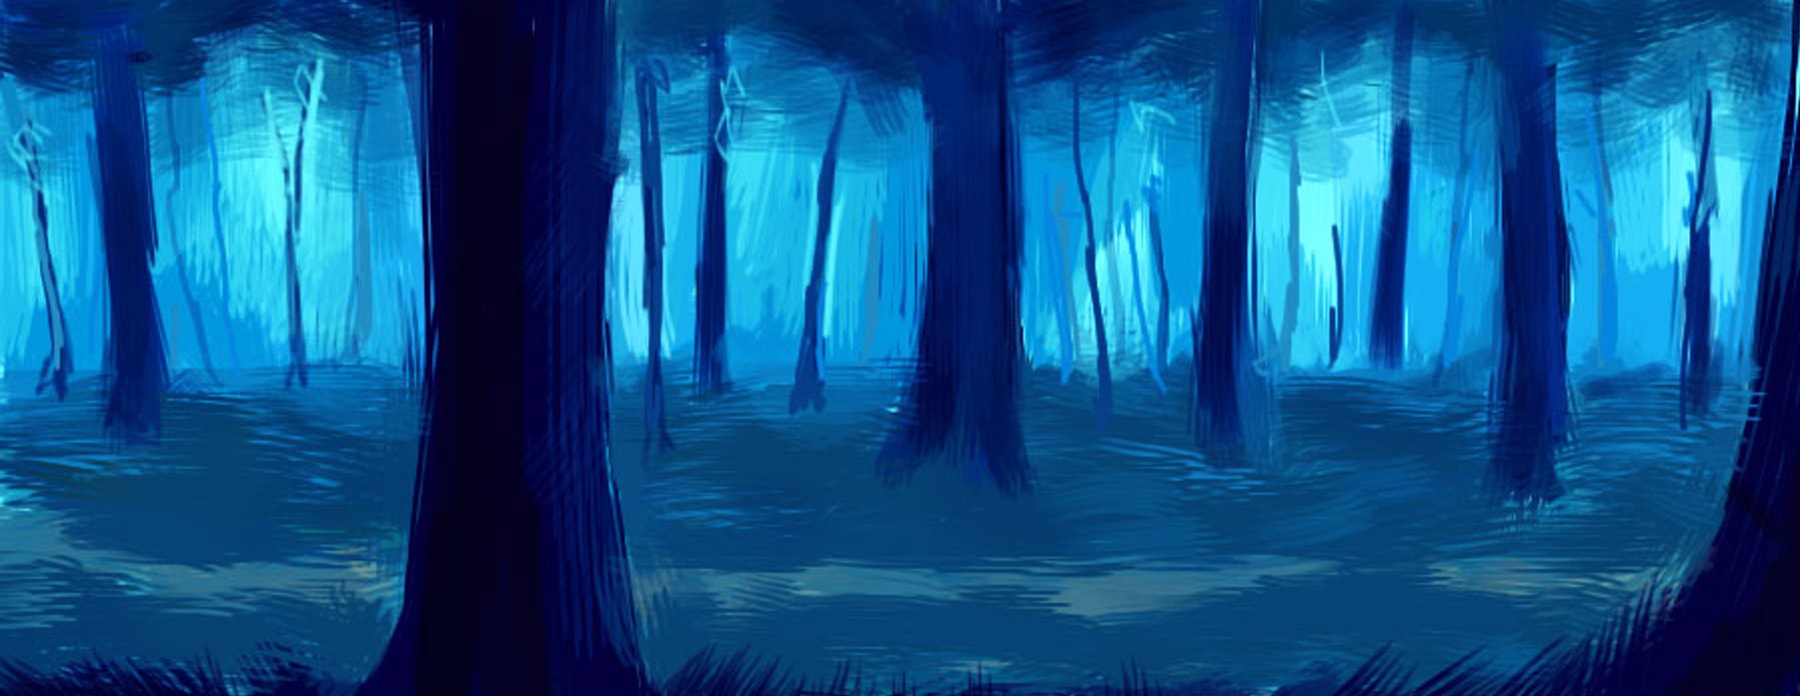 Illustration of a forest rendered in deep blues